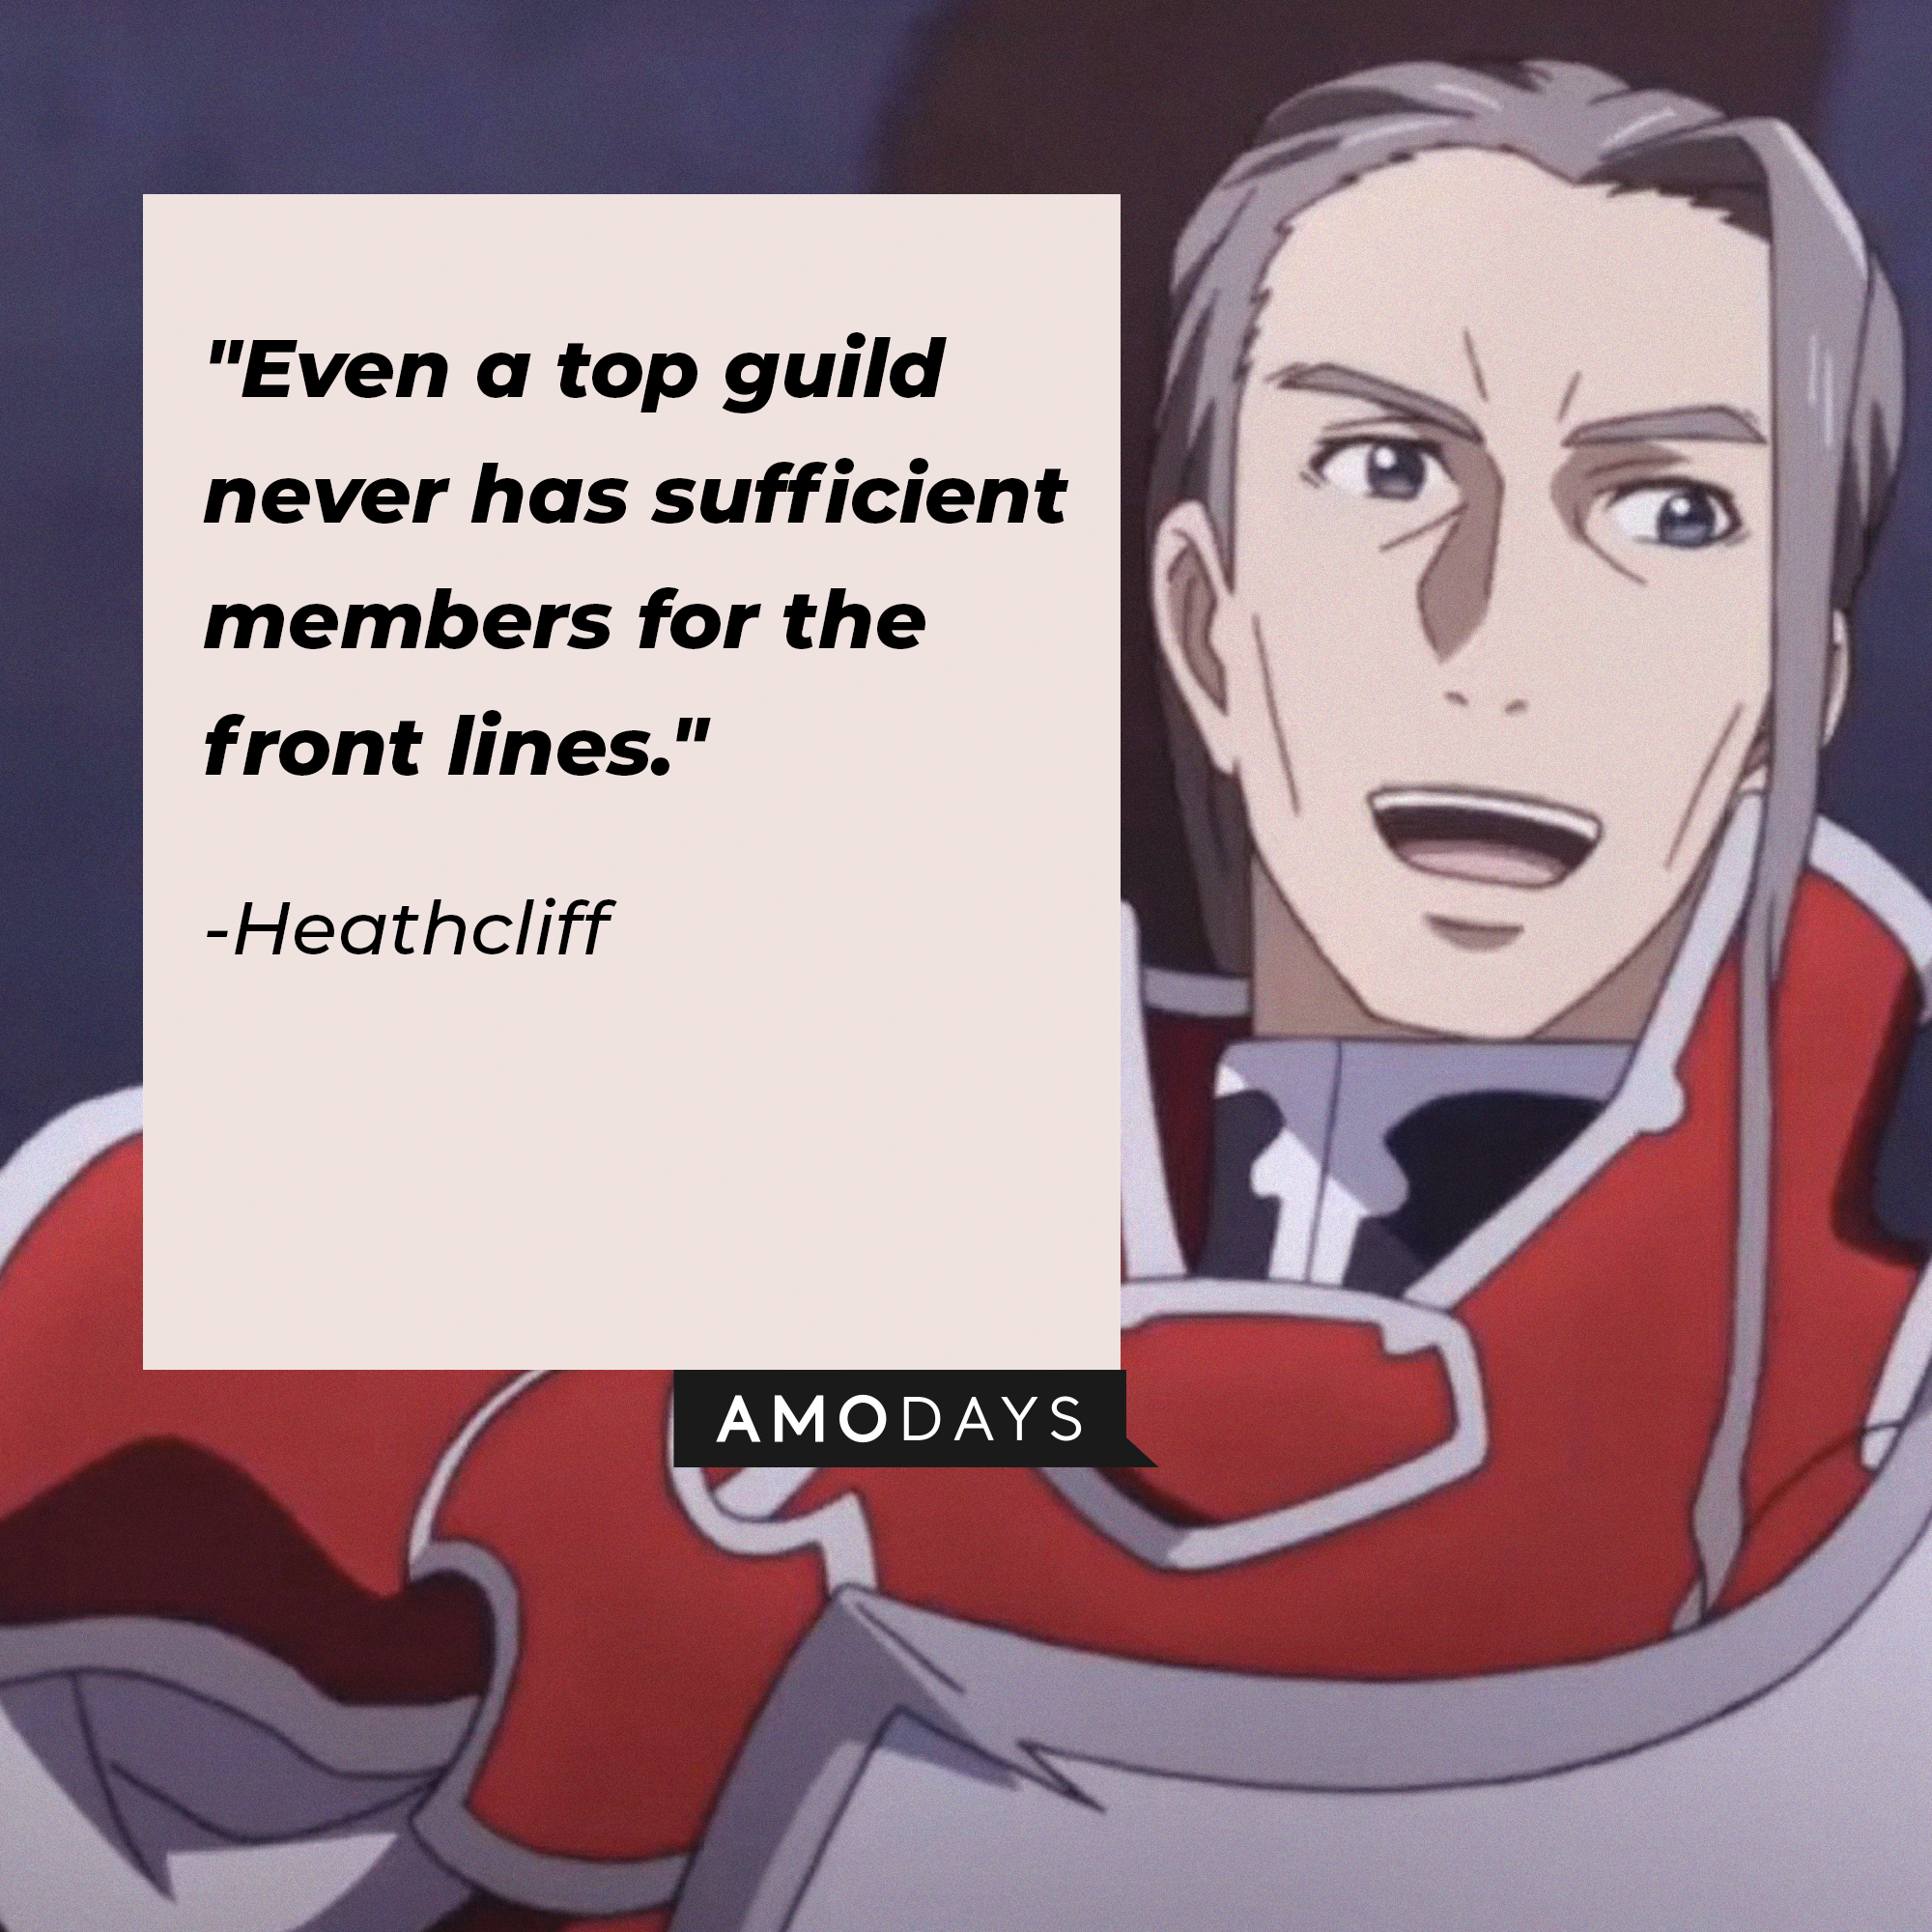 Heathcliff's quote: "Even a top guild never has sufficient members for the front lines." | Source: Facebook.com/SwordArtOnlineUSA